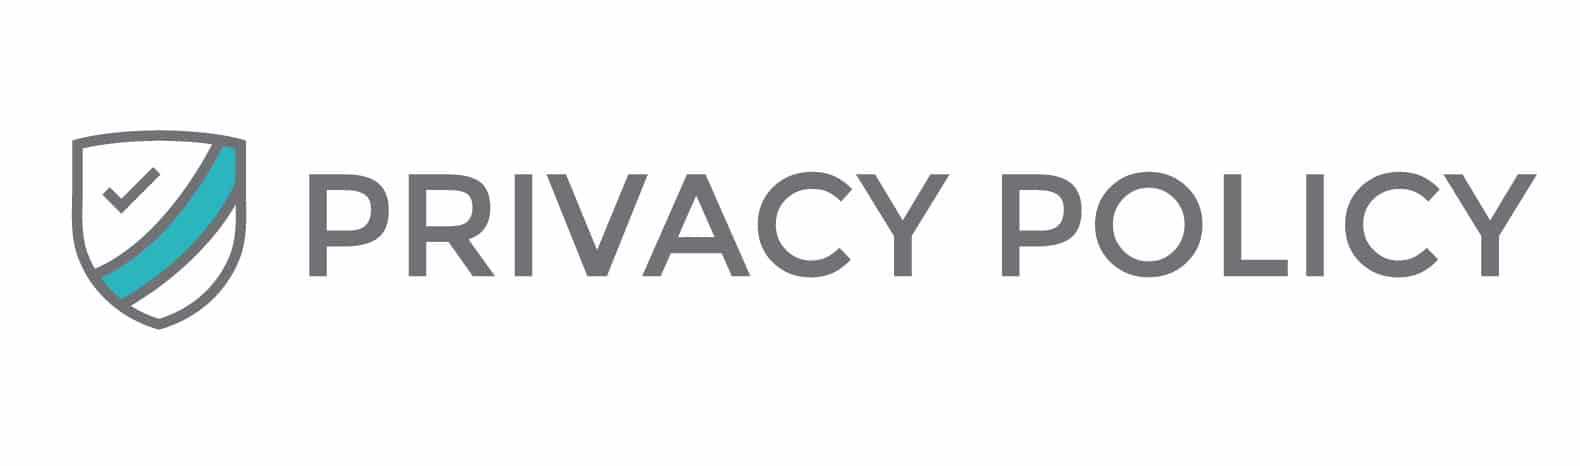 privacy Policy